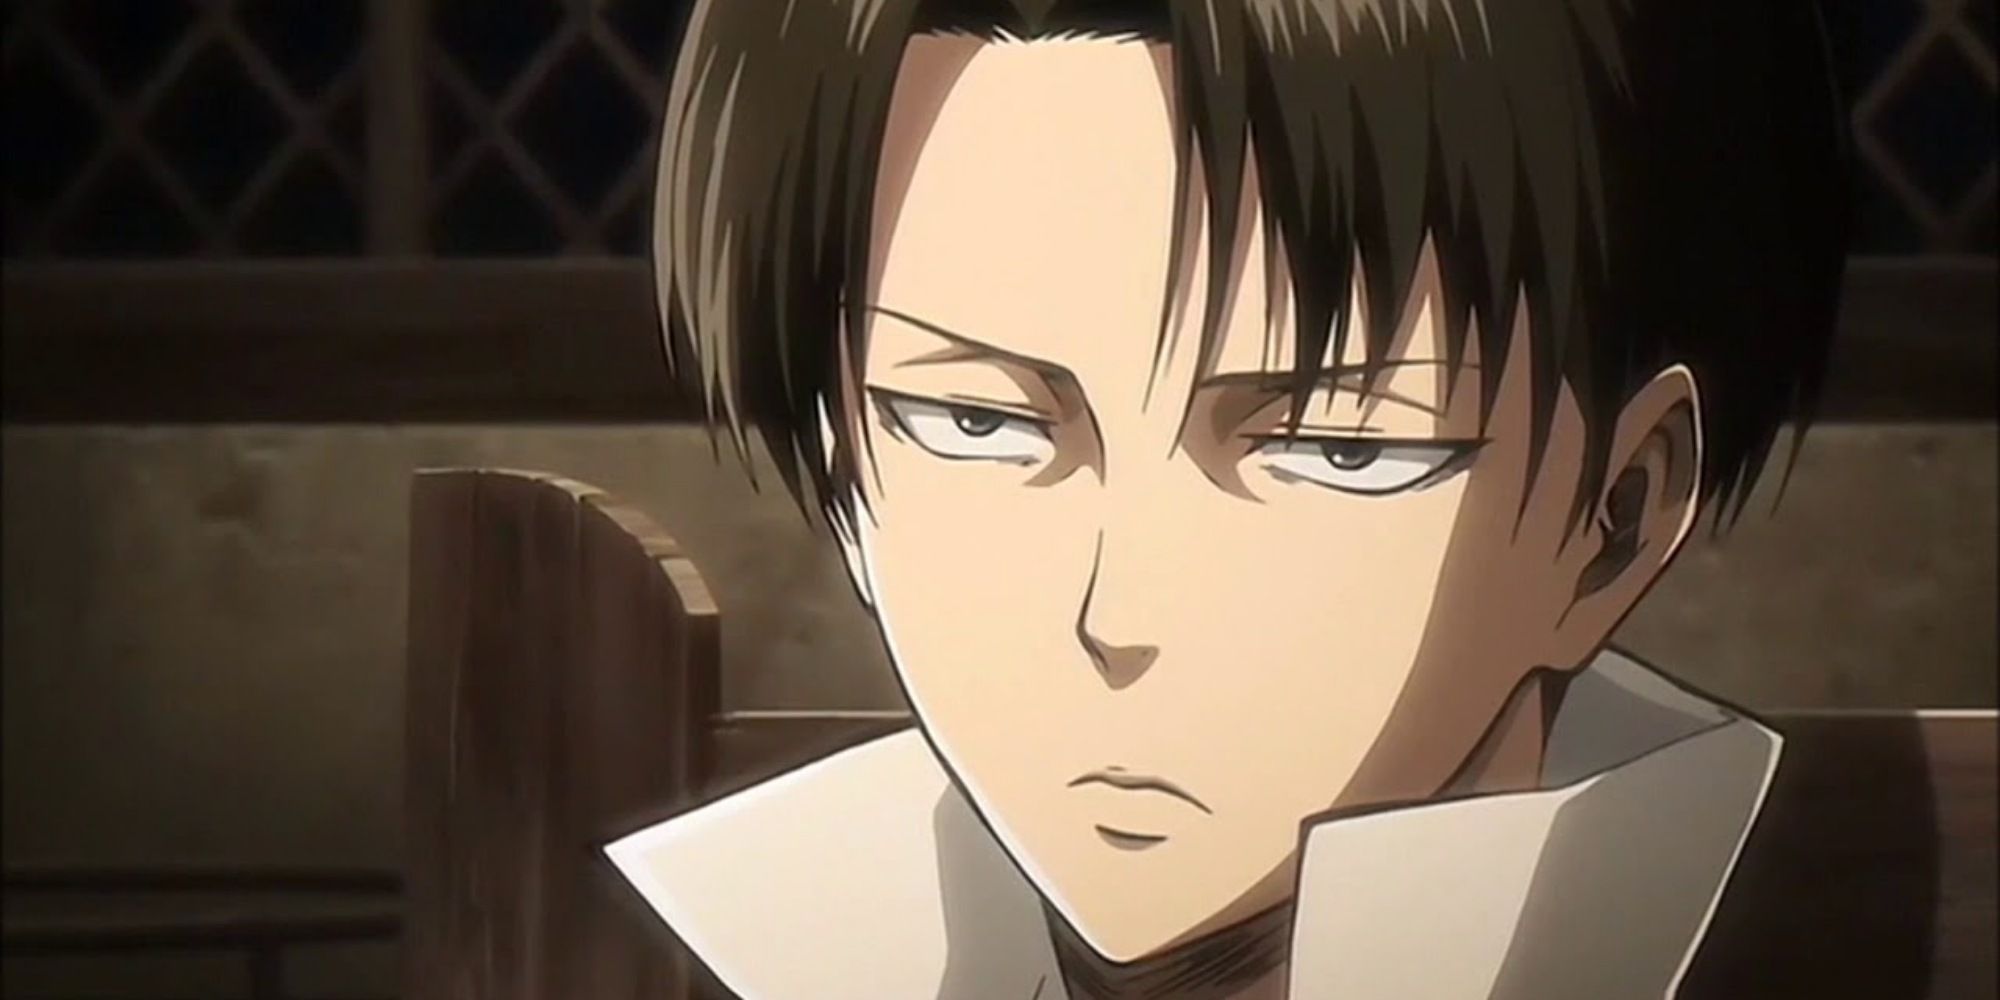 Levi Ackerman looking bored in attack on Titan